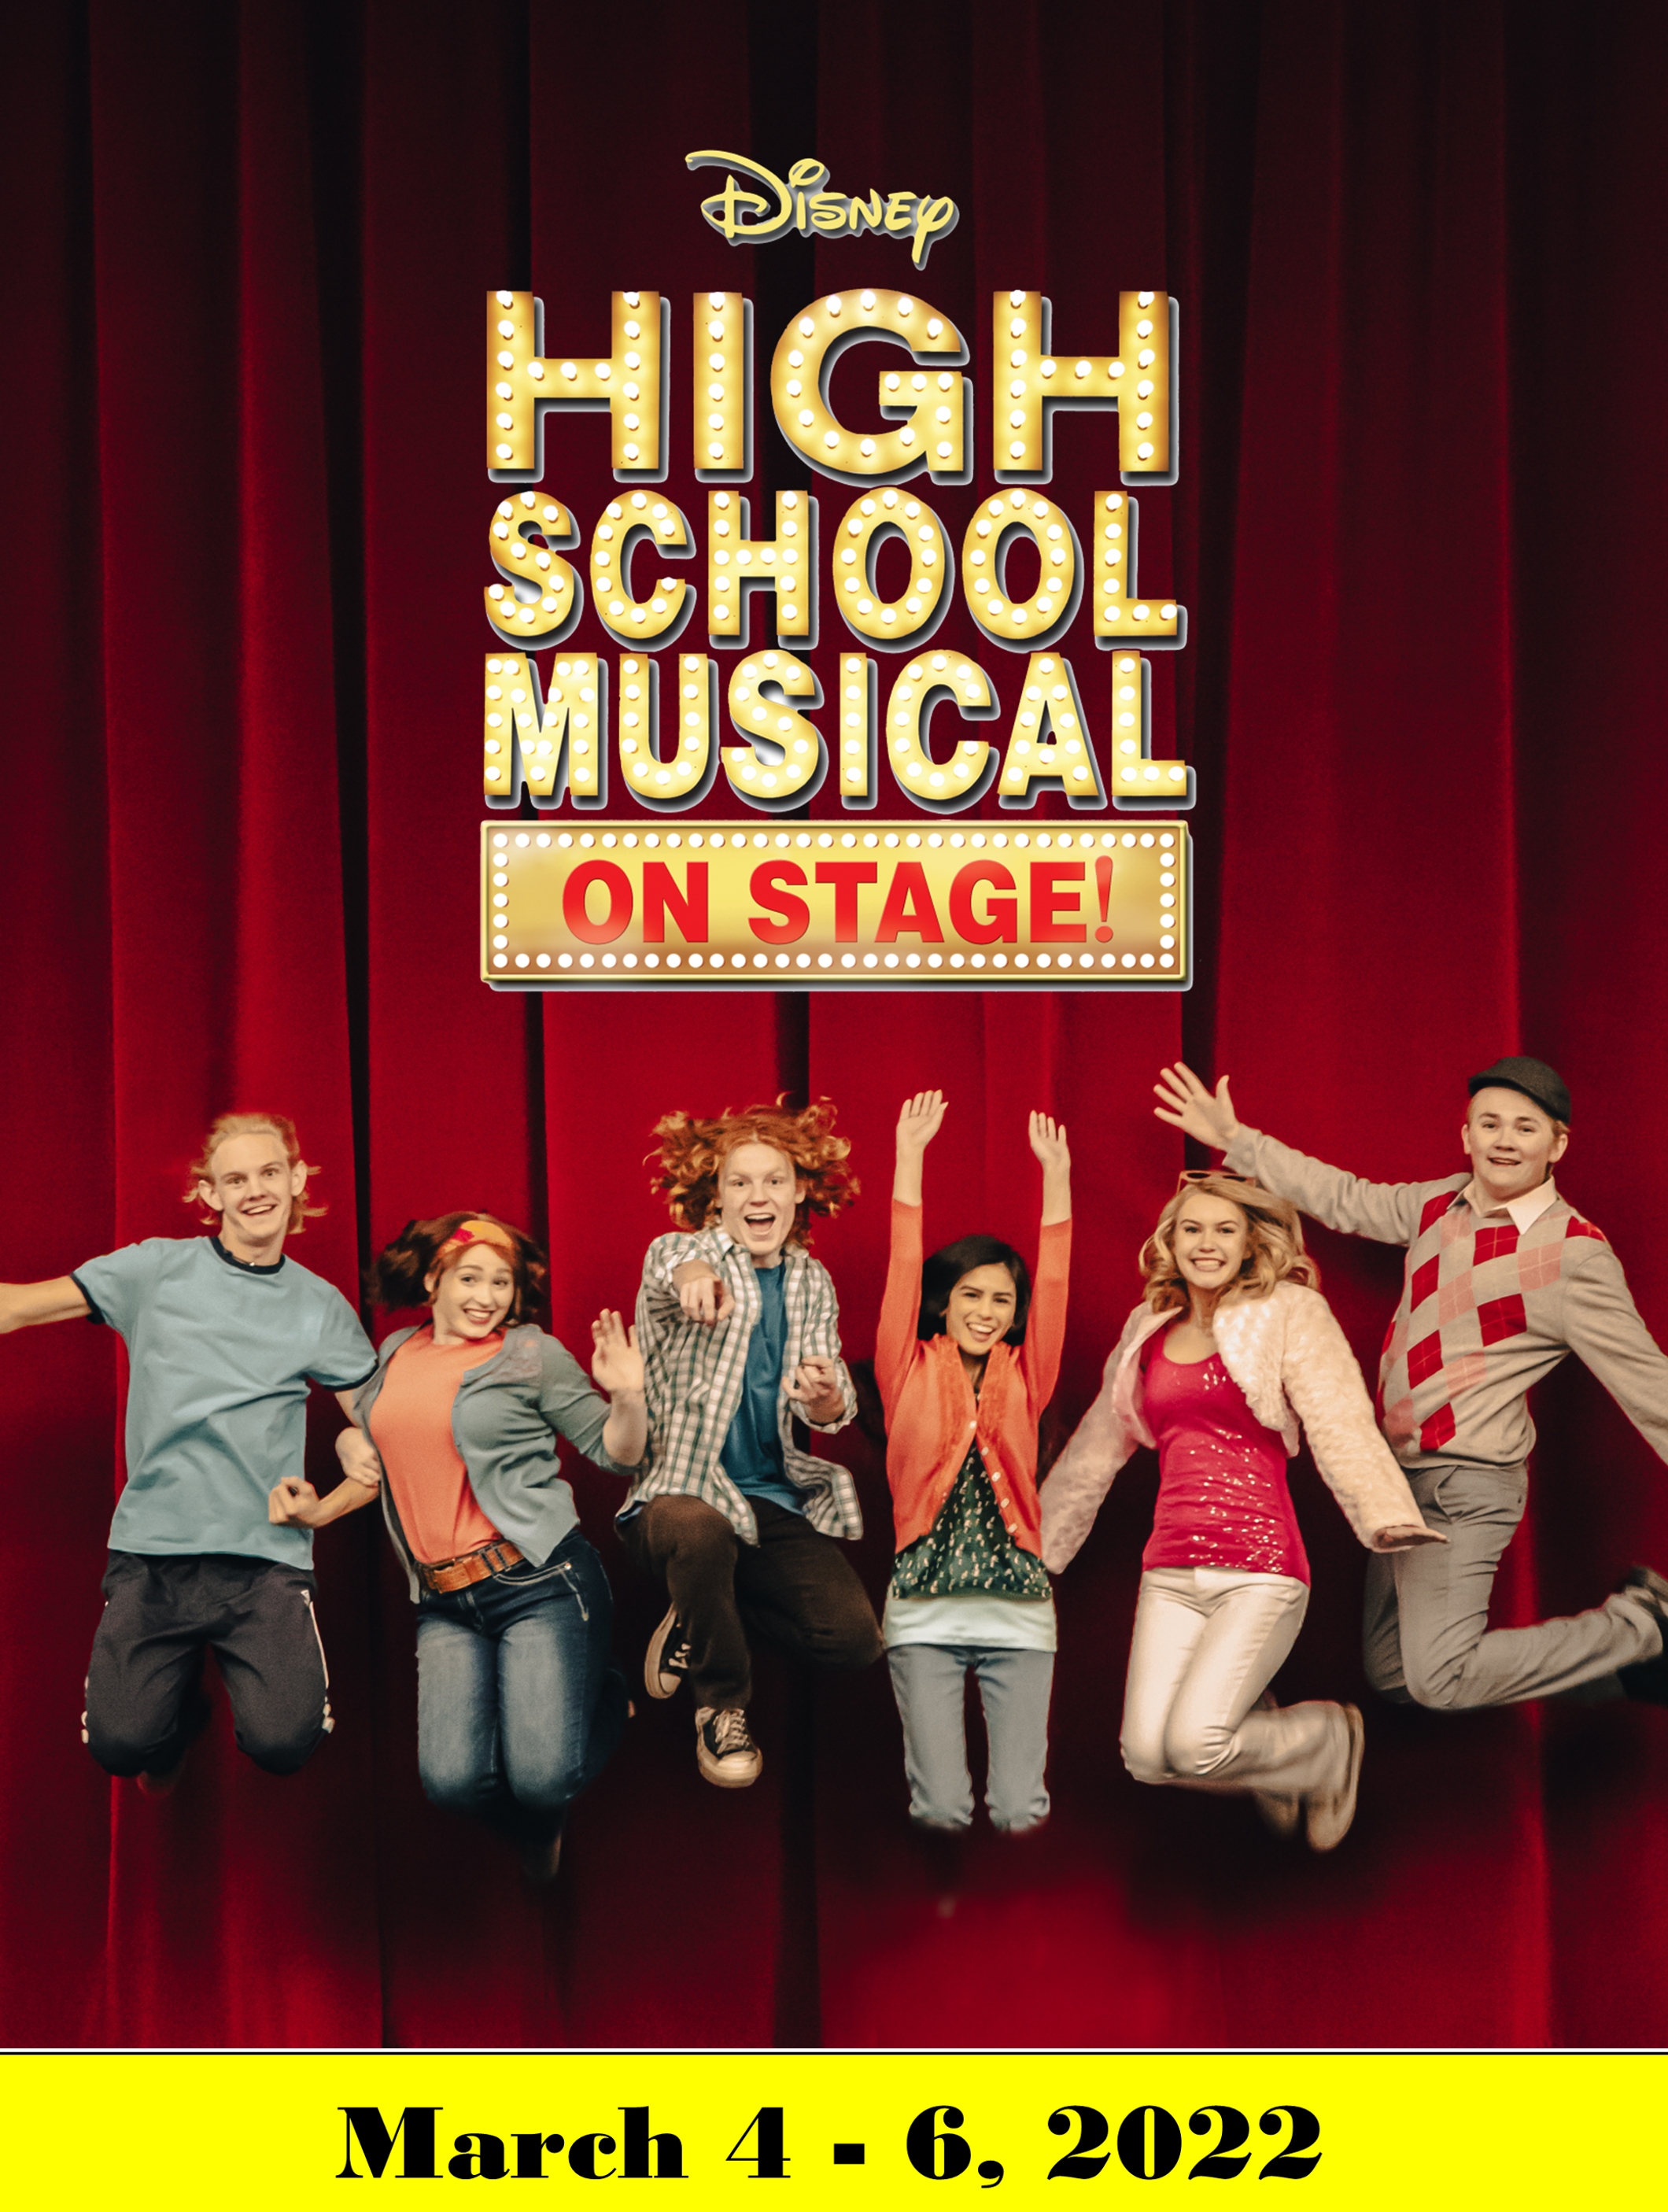 Disney S High School Musical At Northwest Christian School Performances March 4 22 To March 6 22 Cover